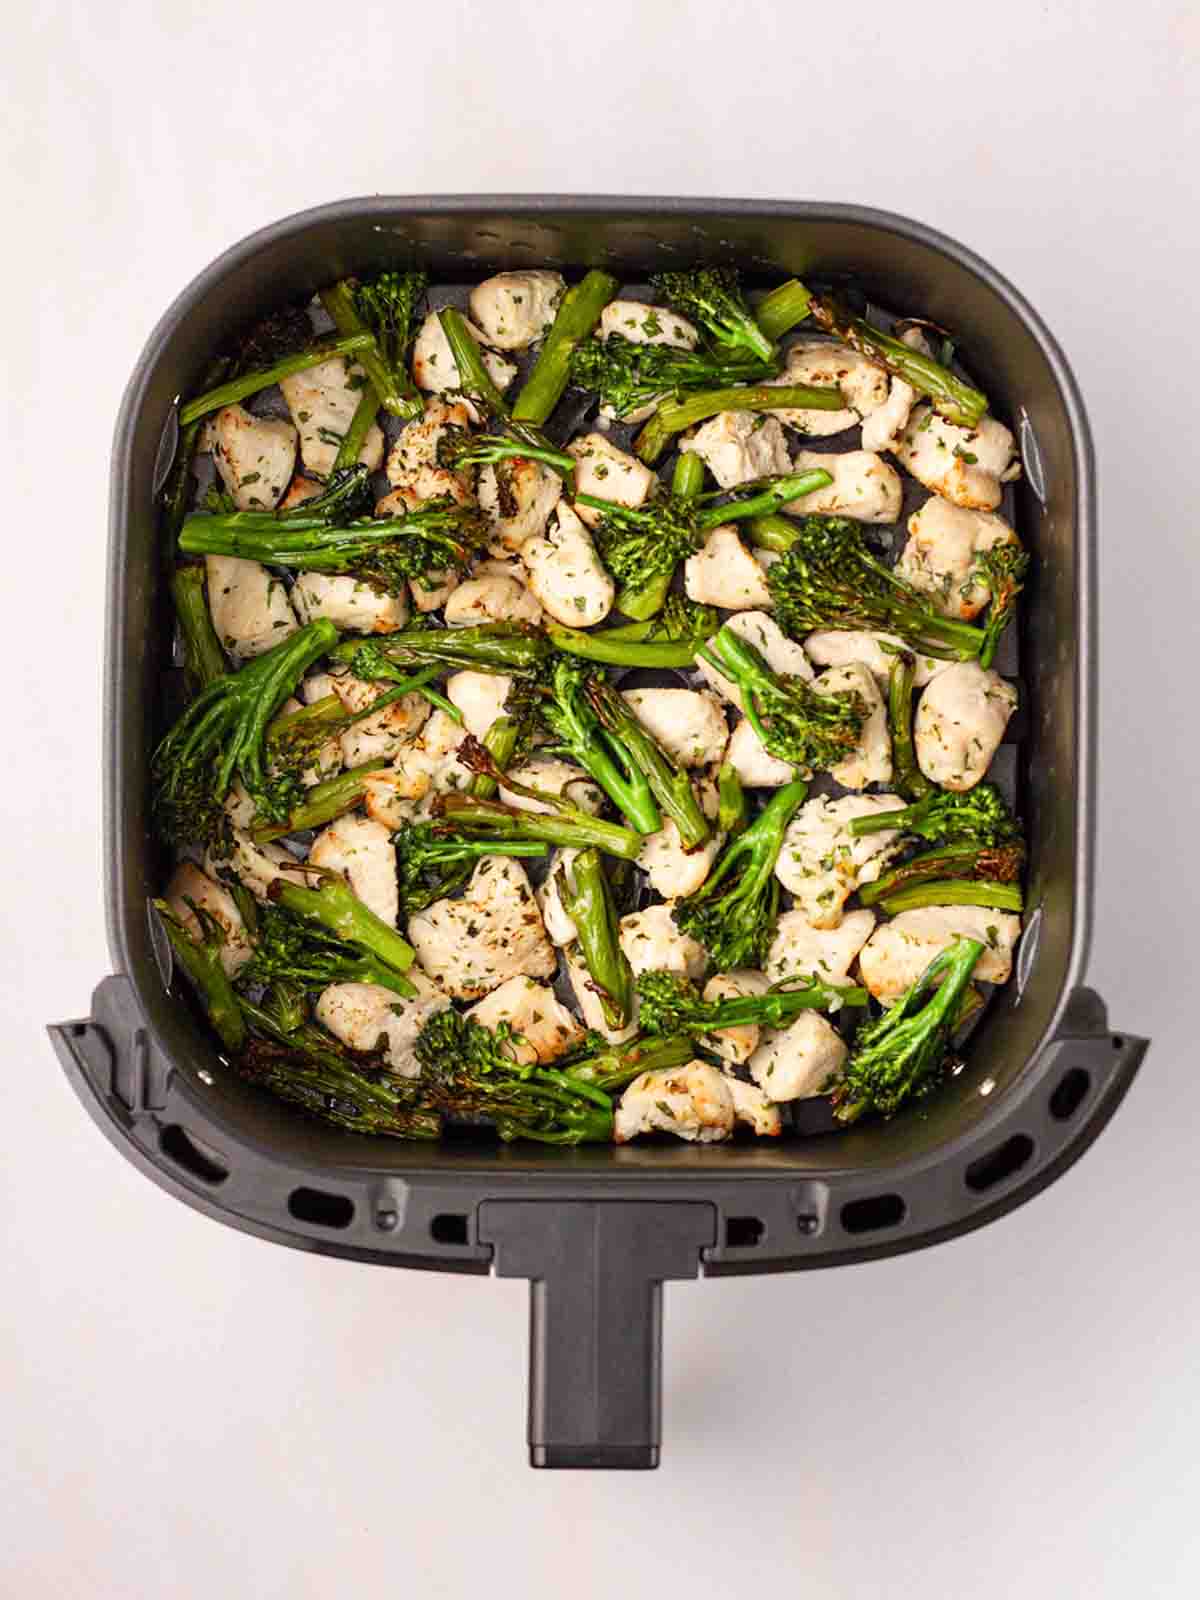 A bird's eye view of an air fryer tray with cooked chicken and broccoli inside for the recipe Garlic Butter Chicken.